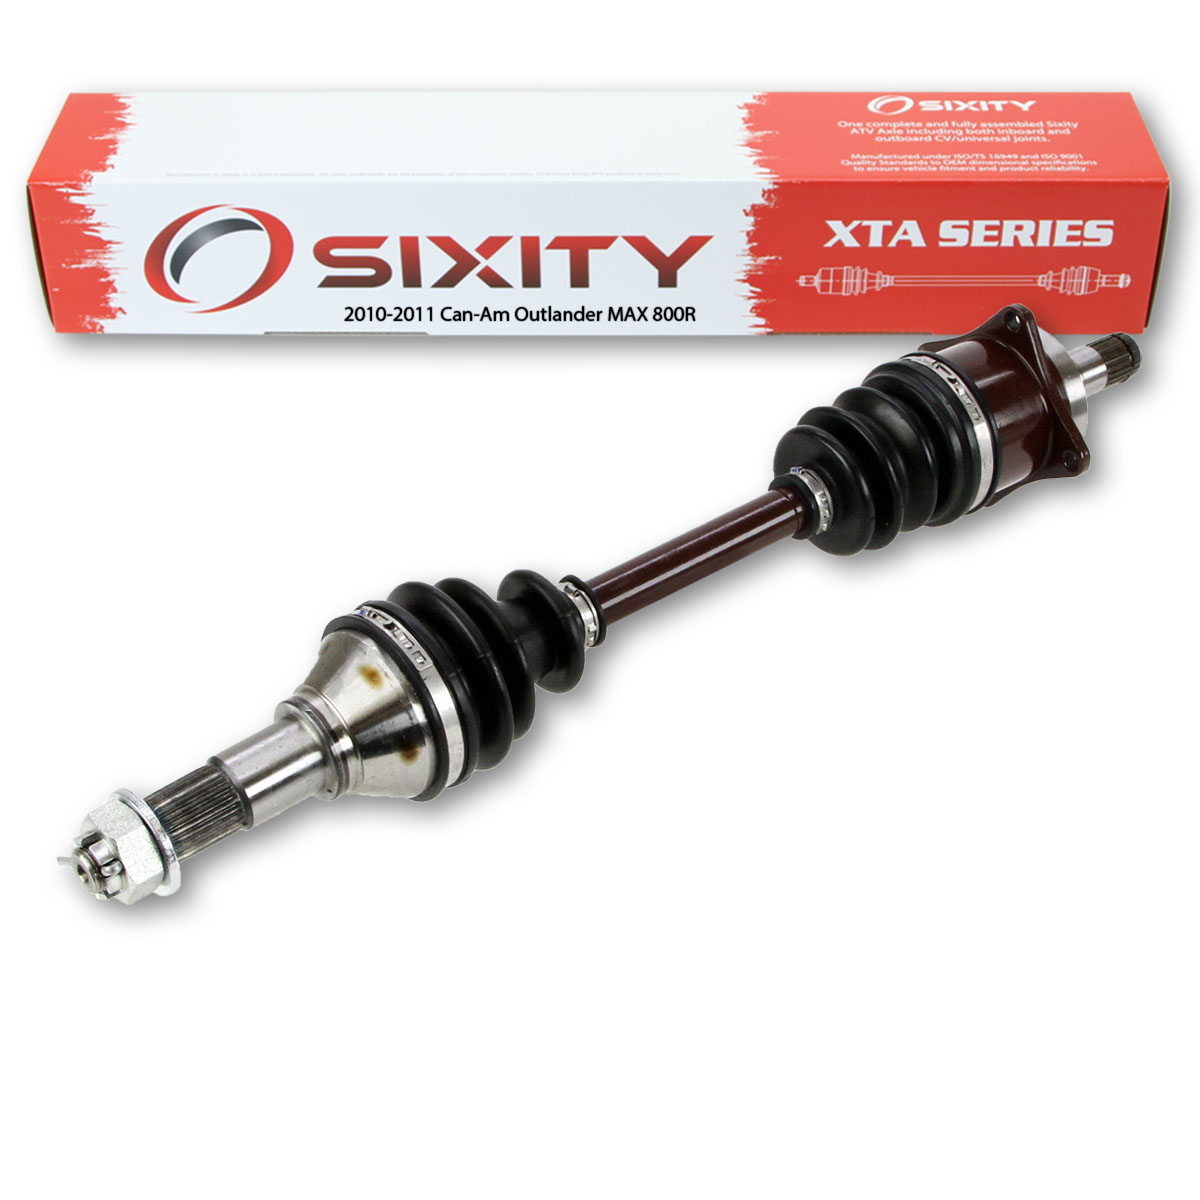 Sixity 2010-2011 Can-Am Outlander MAX 800R 4X4 Front Left XTA ATV Axle